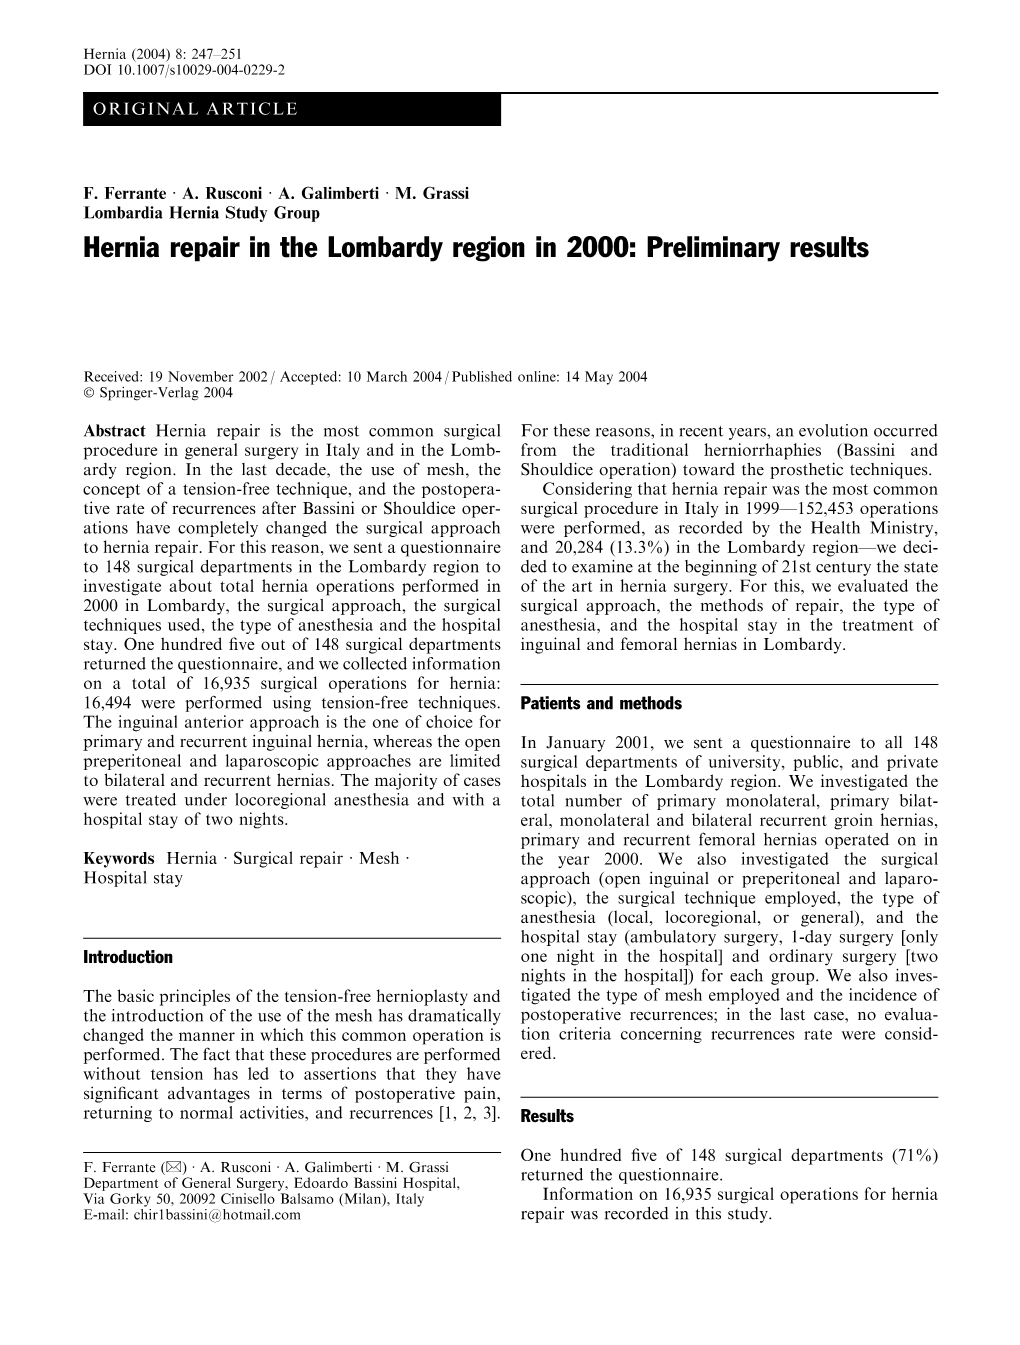 Hernia Repair in the Lombardy Region in 2000: Preliminary Results